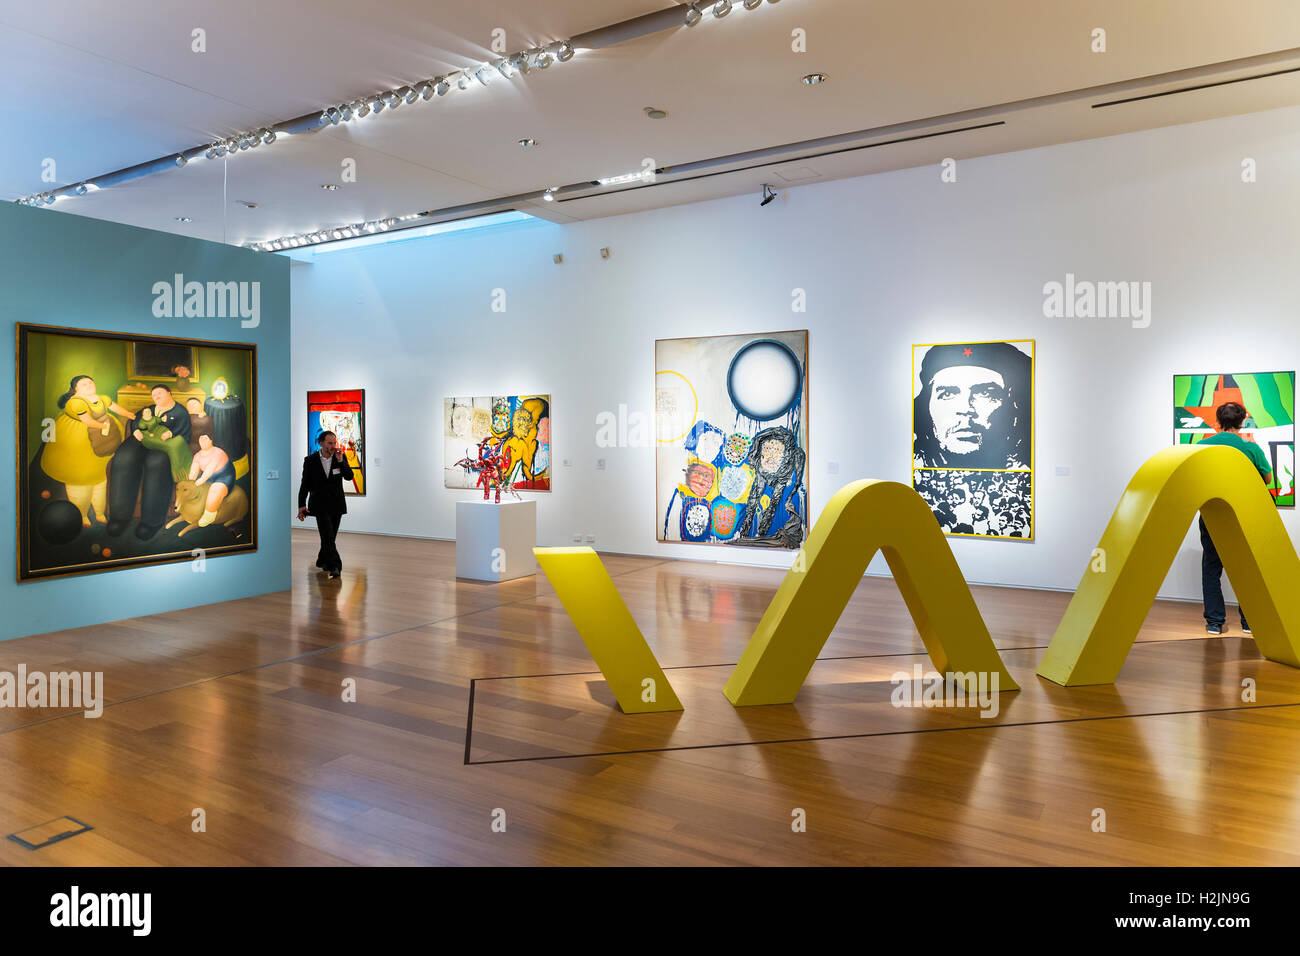 Buenos Aires, Argentina - October 5, 2013: People in an art exhibition in the Malba Museum in Buenos Aires Stock Photo